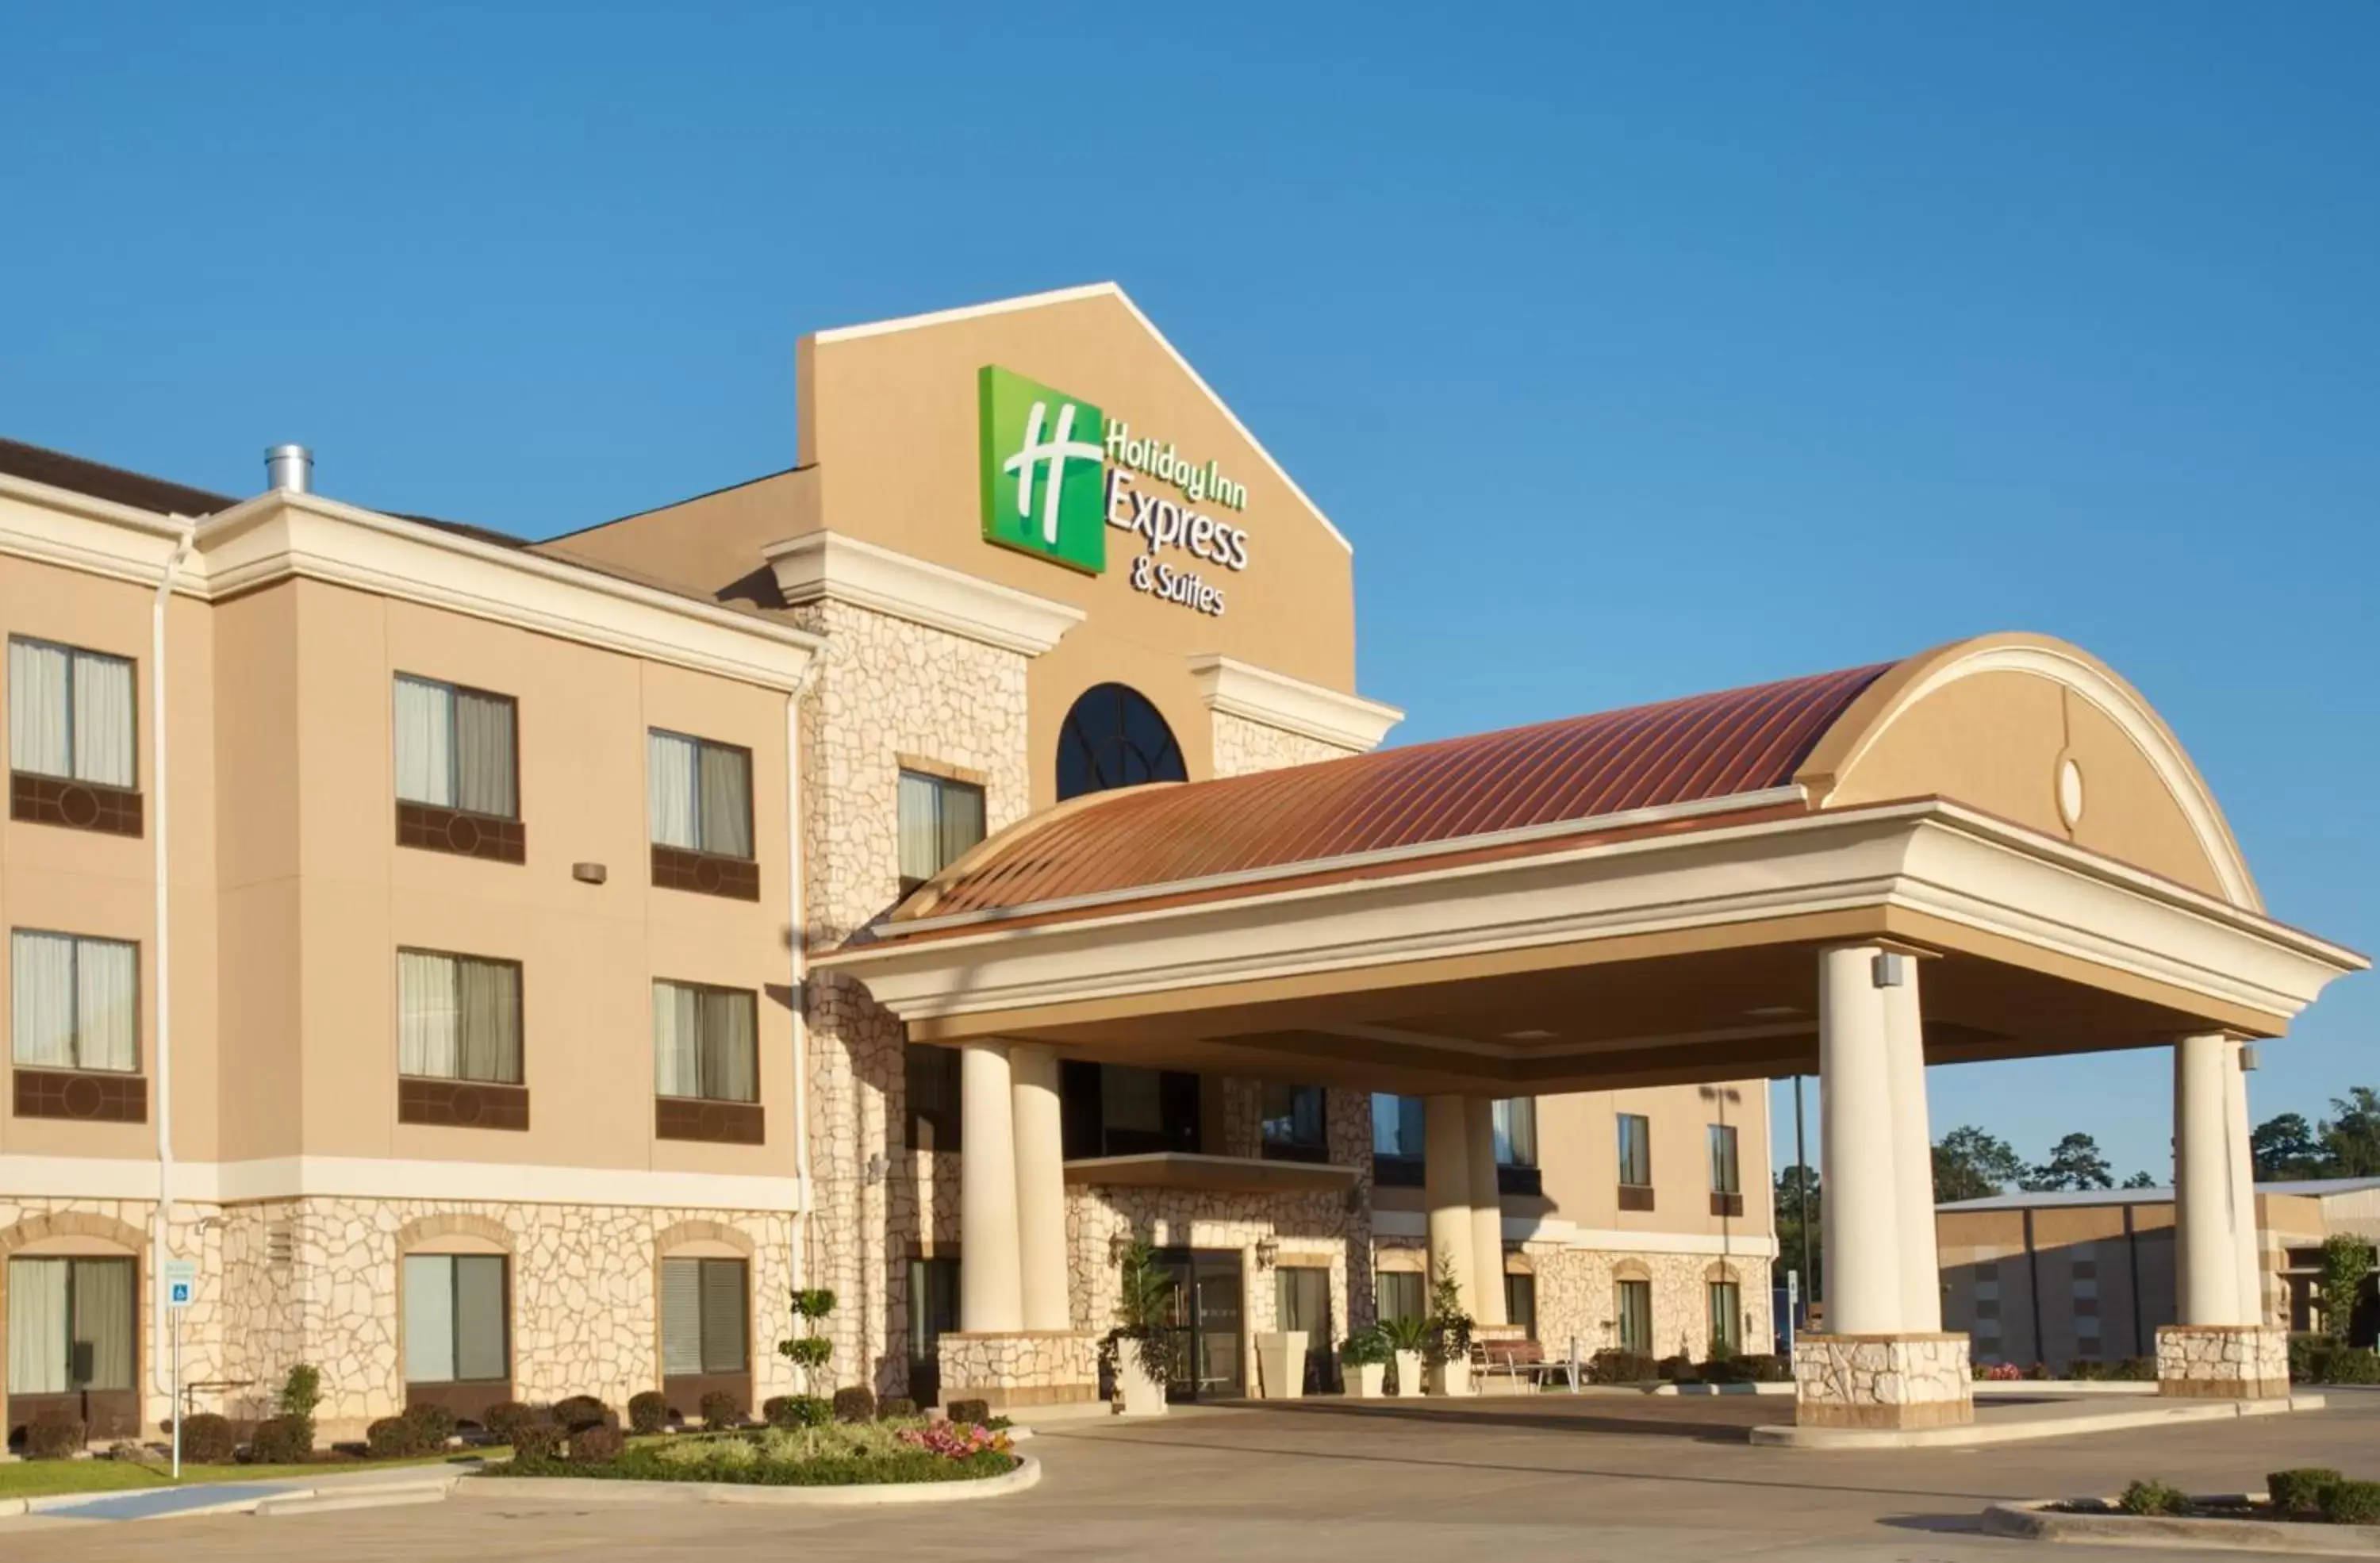 Property building in Holiday Inn Express Hotel & Suites Center, an IHG Hotel